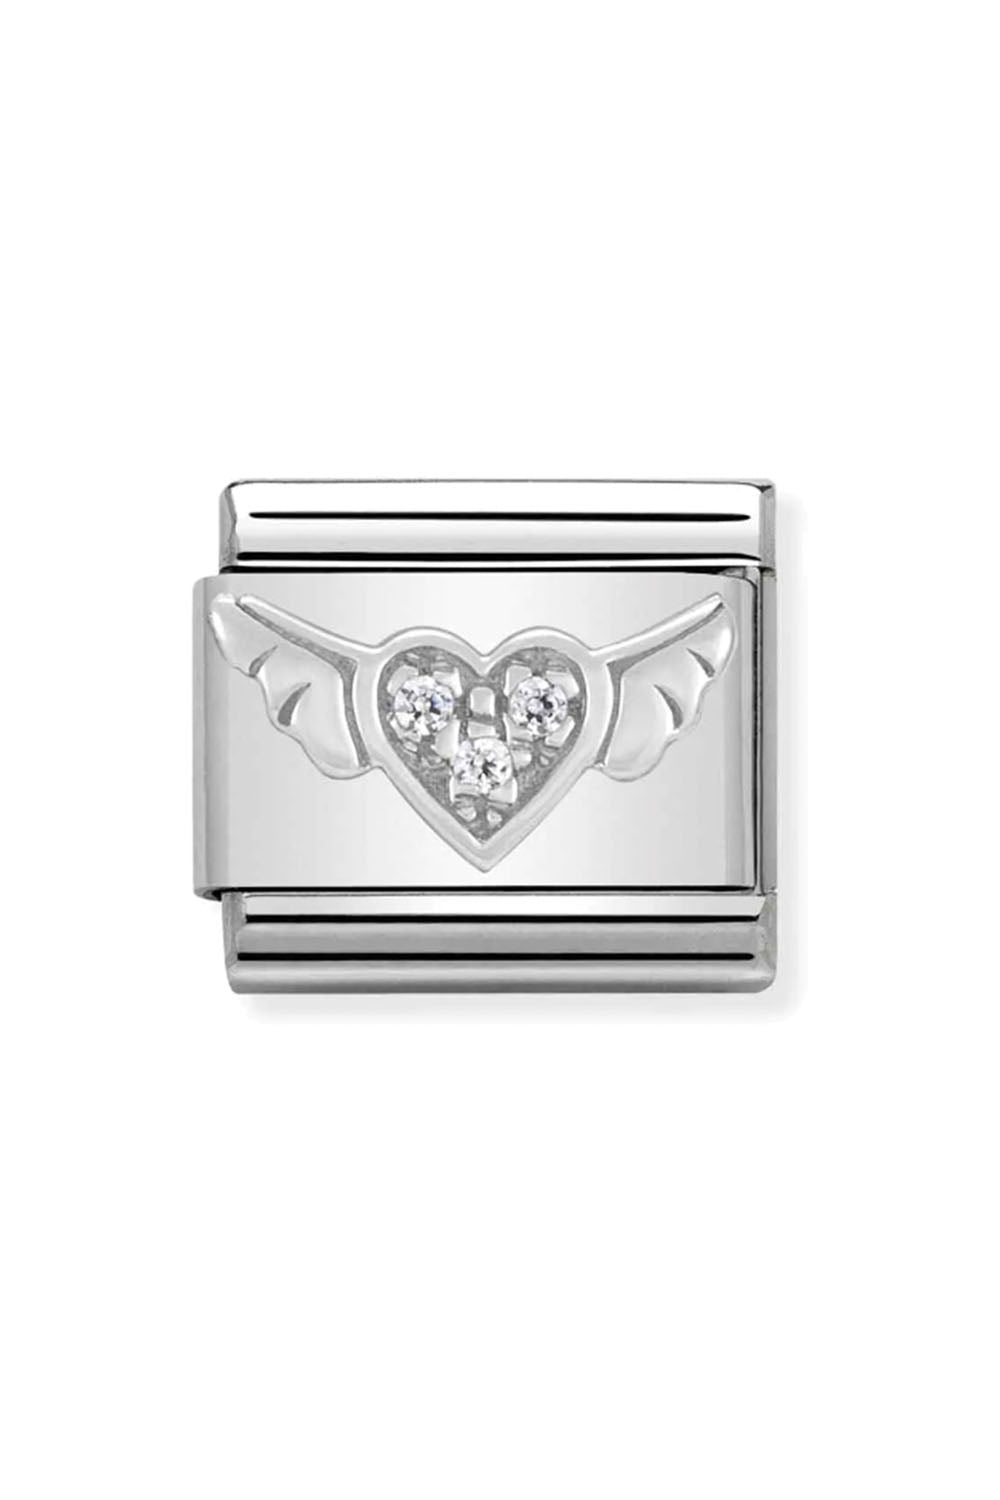 Symbols 925 Sterling Silver with CZ Flying heart